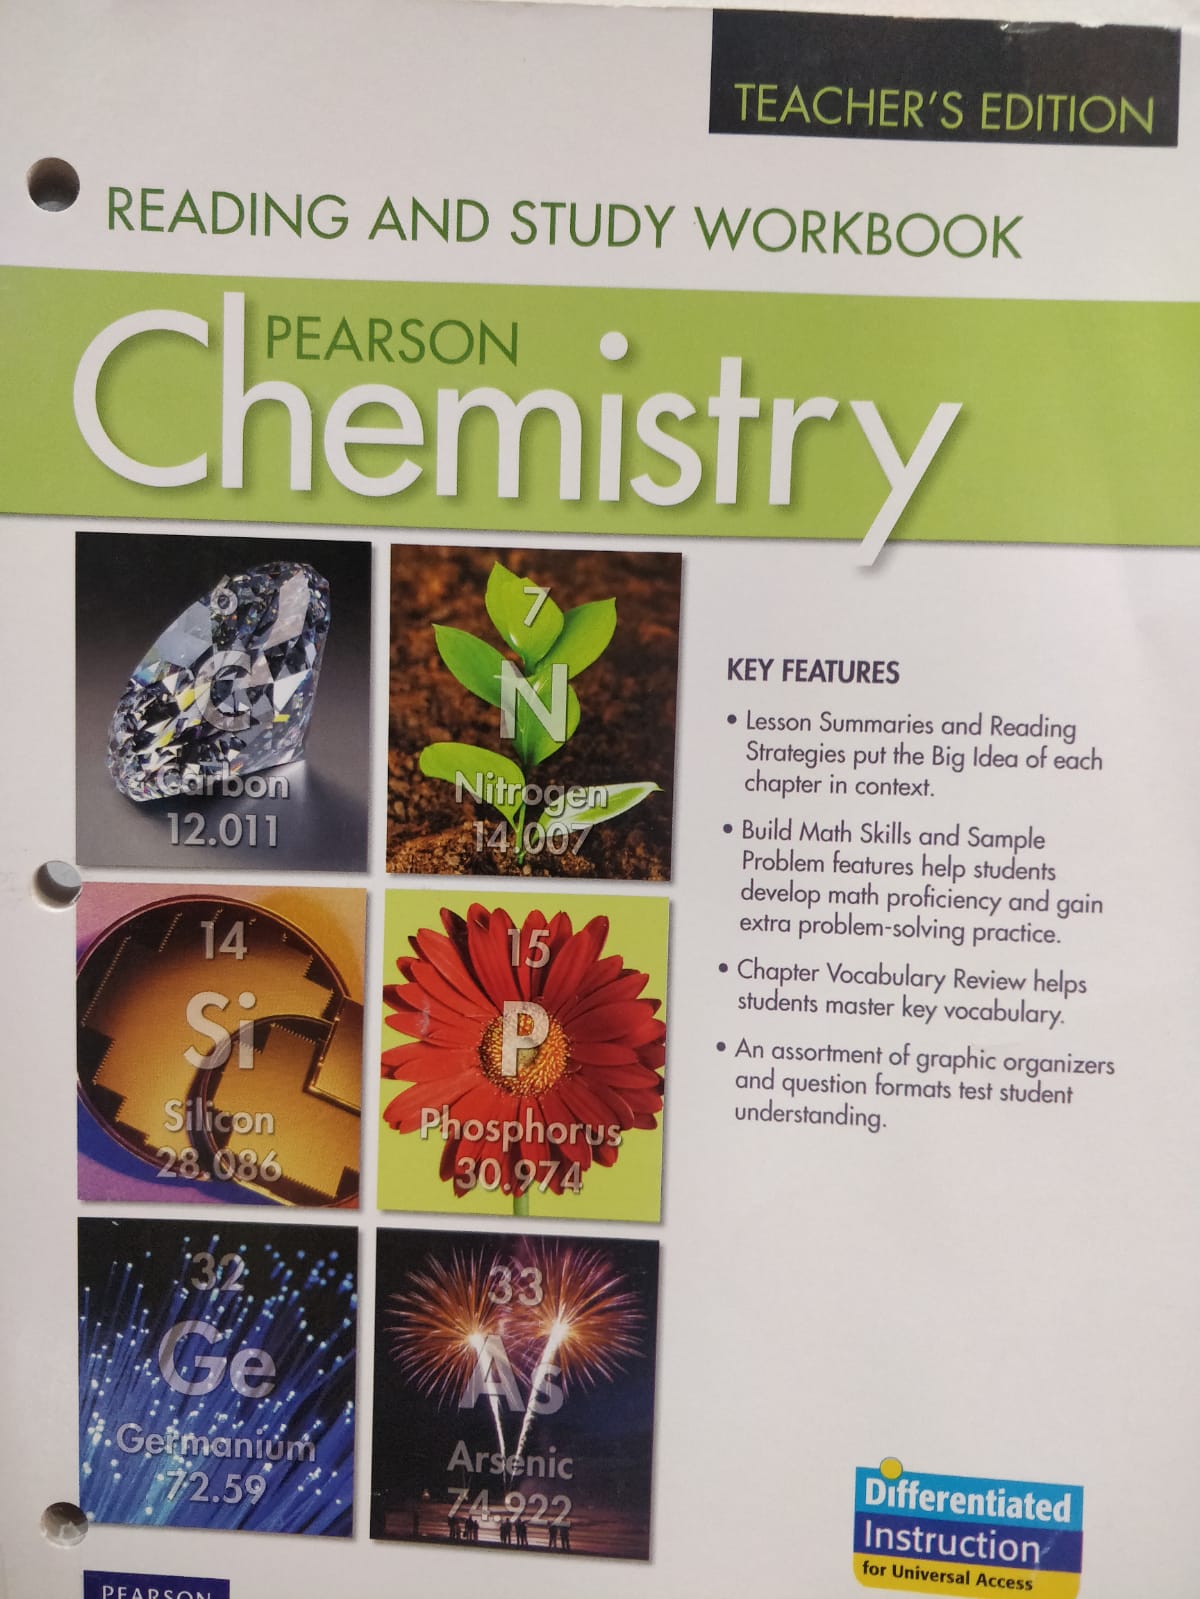 Reading and Study Workbook for Chemistry Teacher's Edition